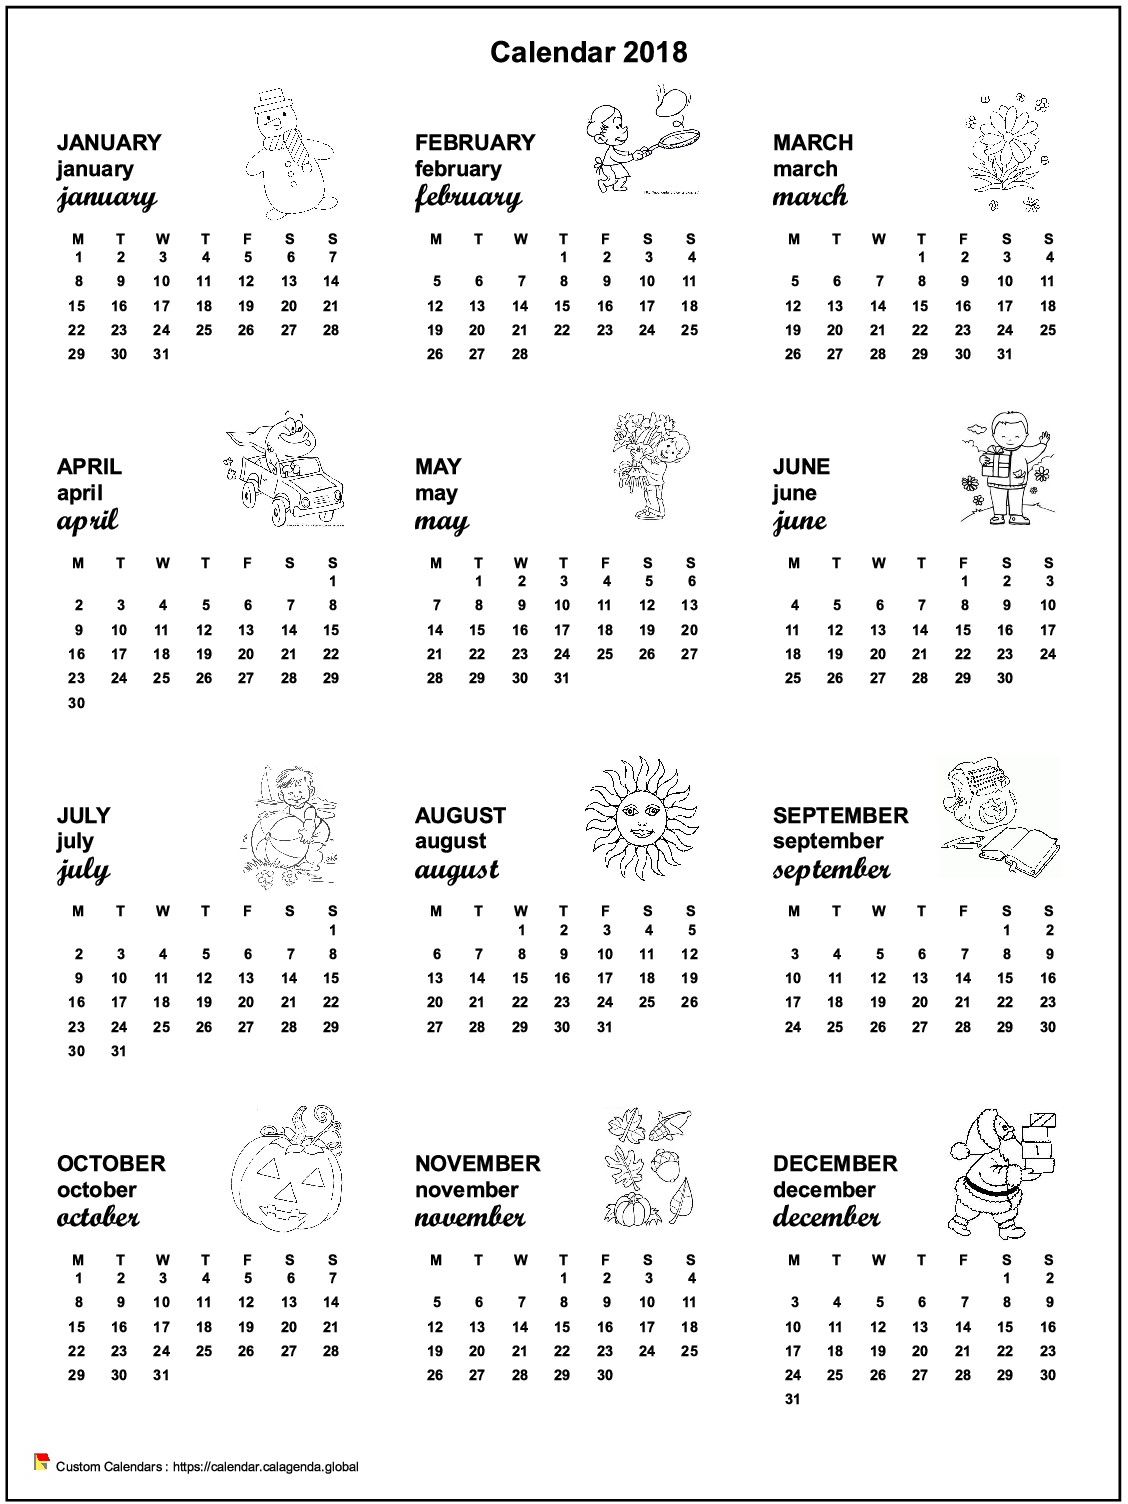 Calendar 2081 annual maternal and primary school